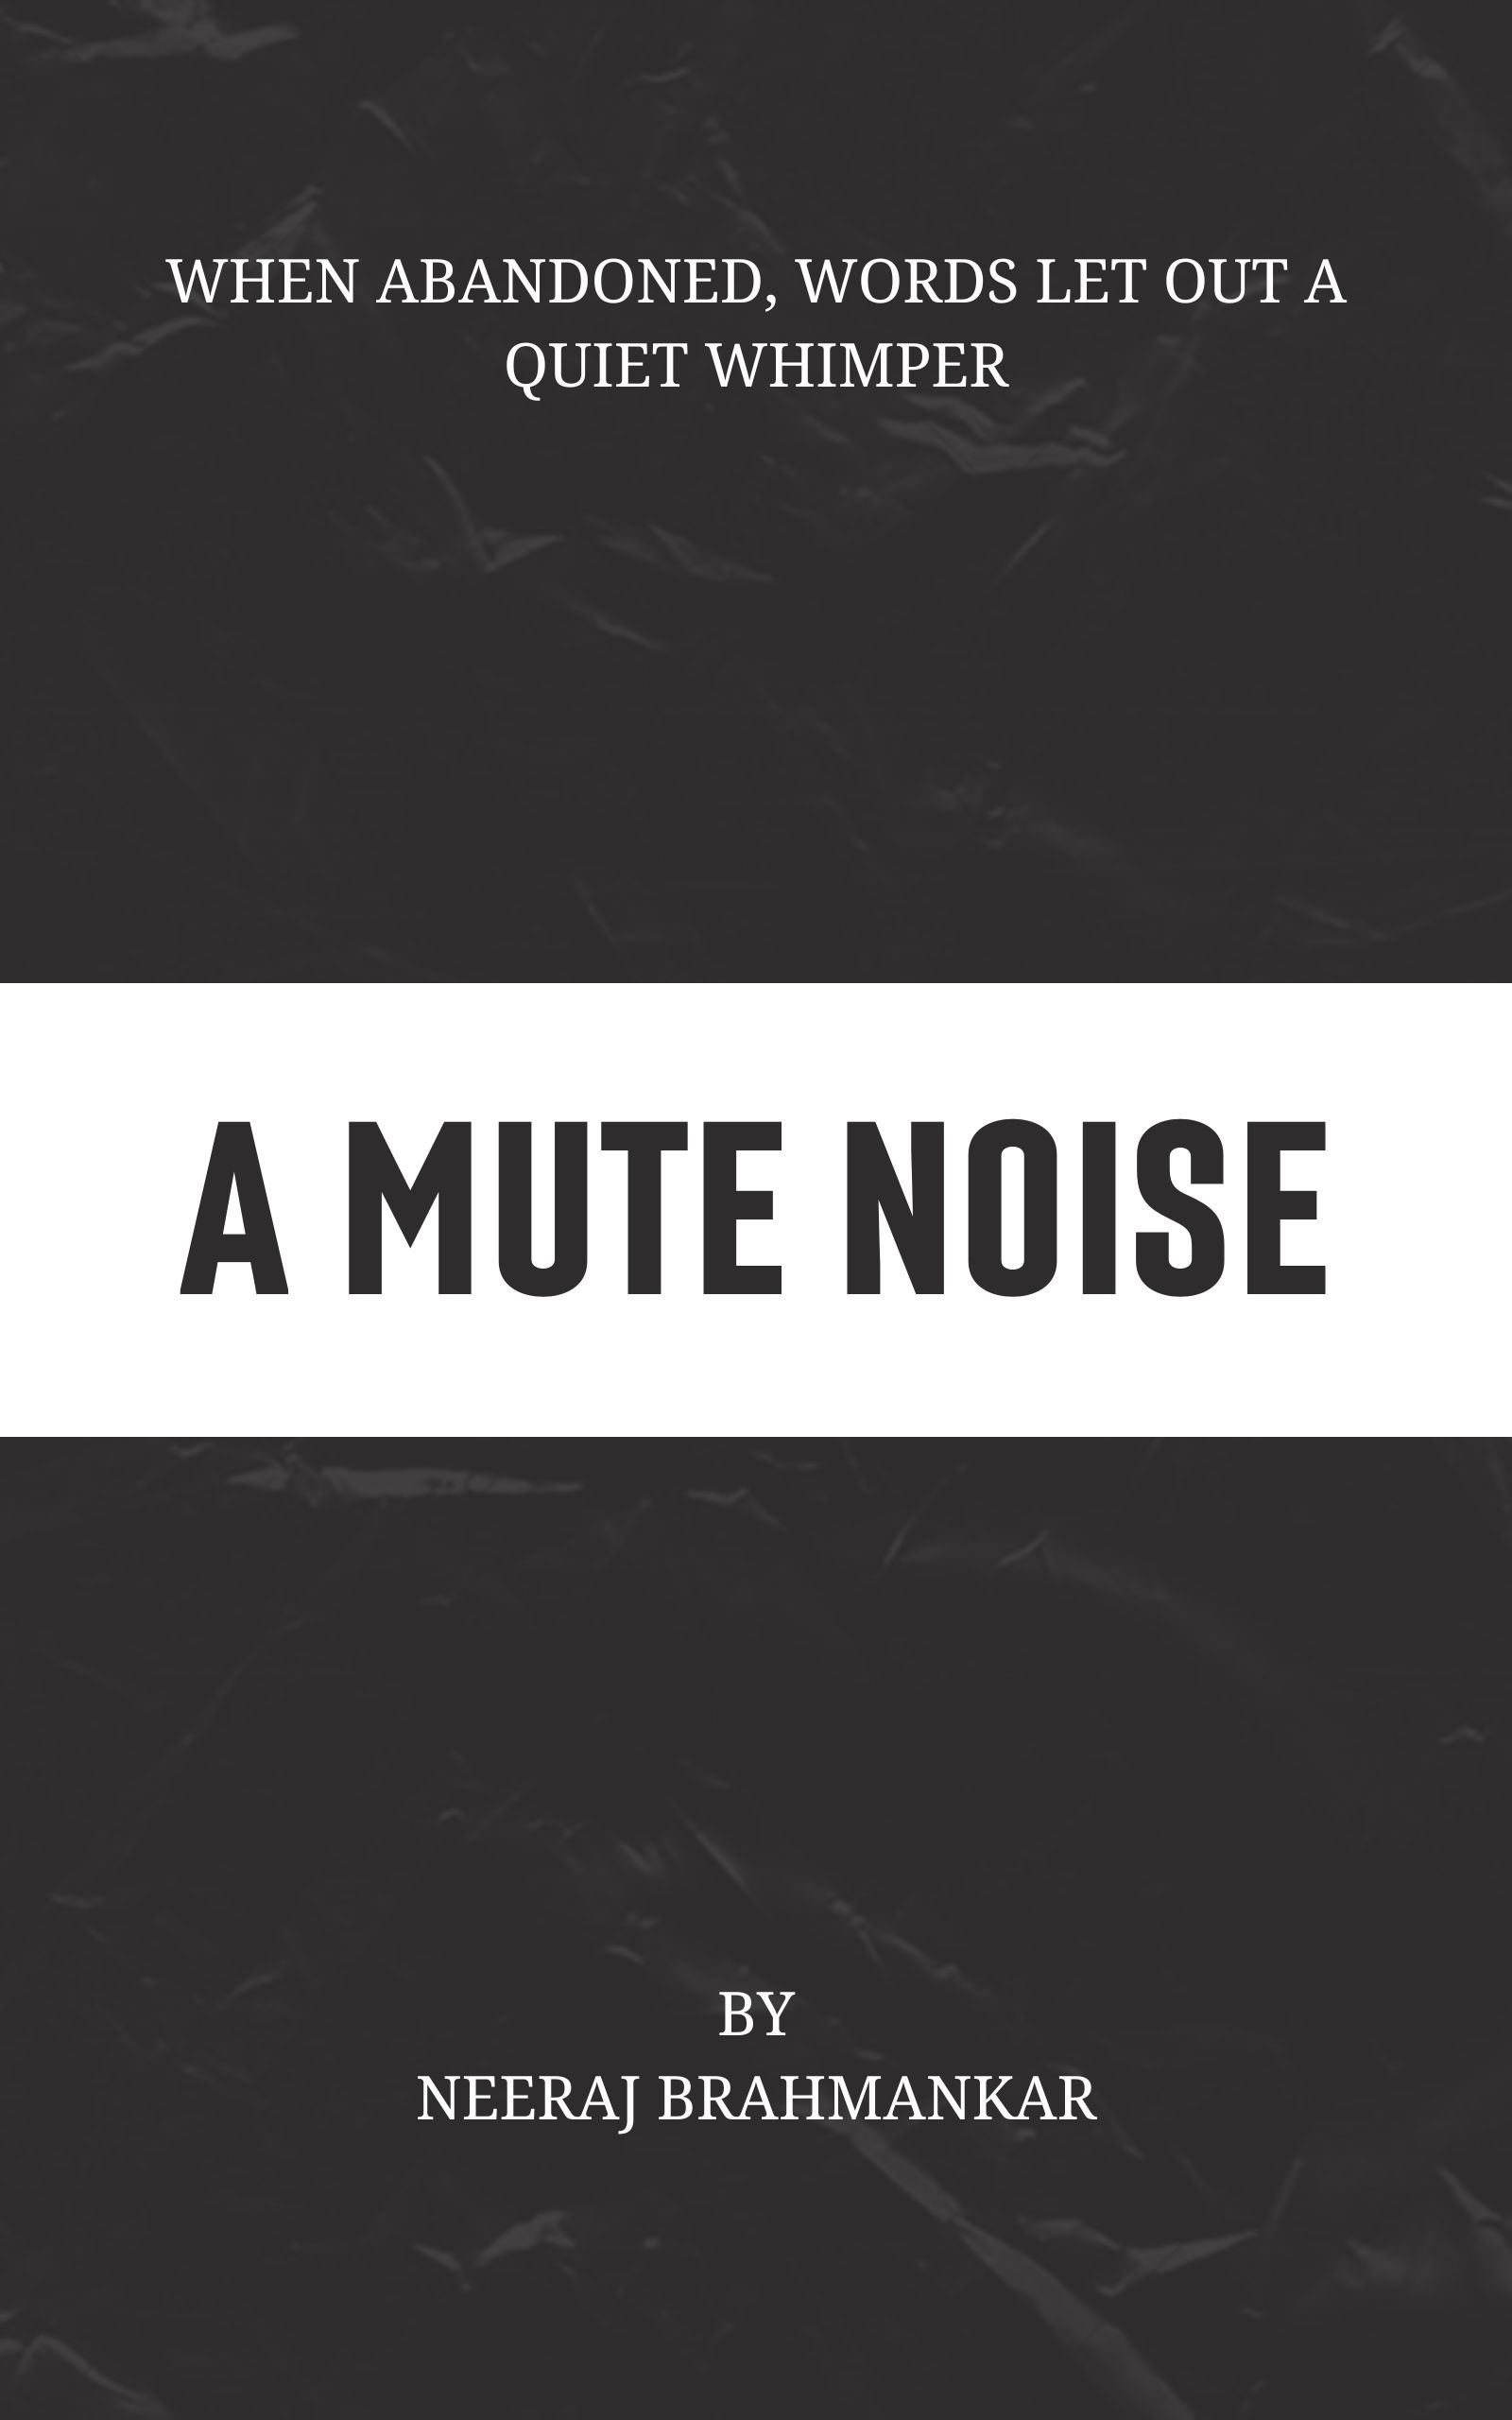 A MUTE NOISE book by neeraj - link